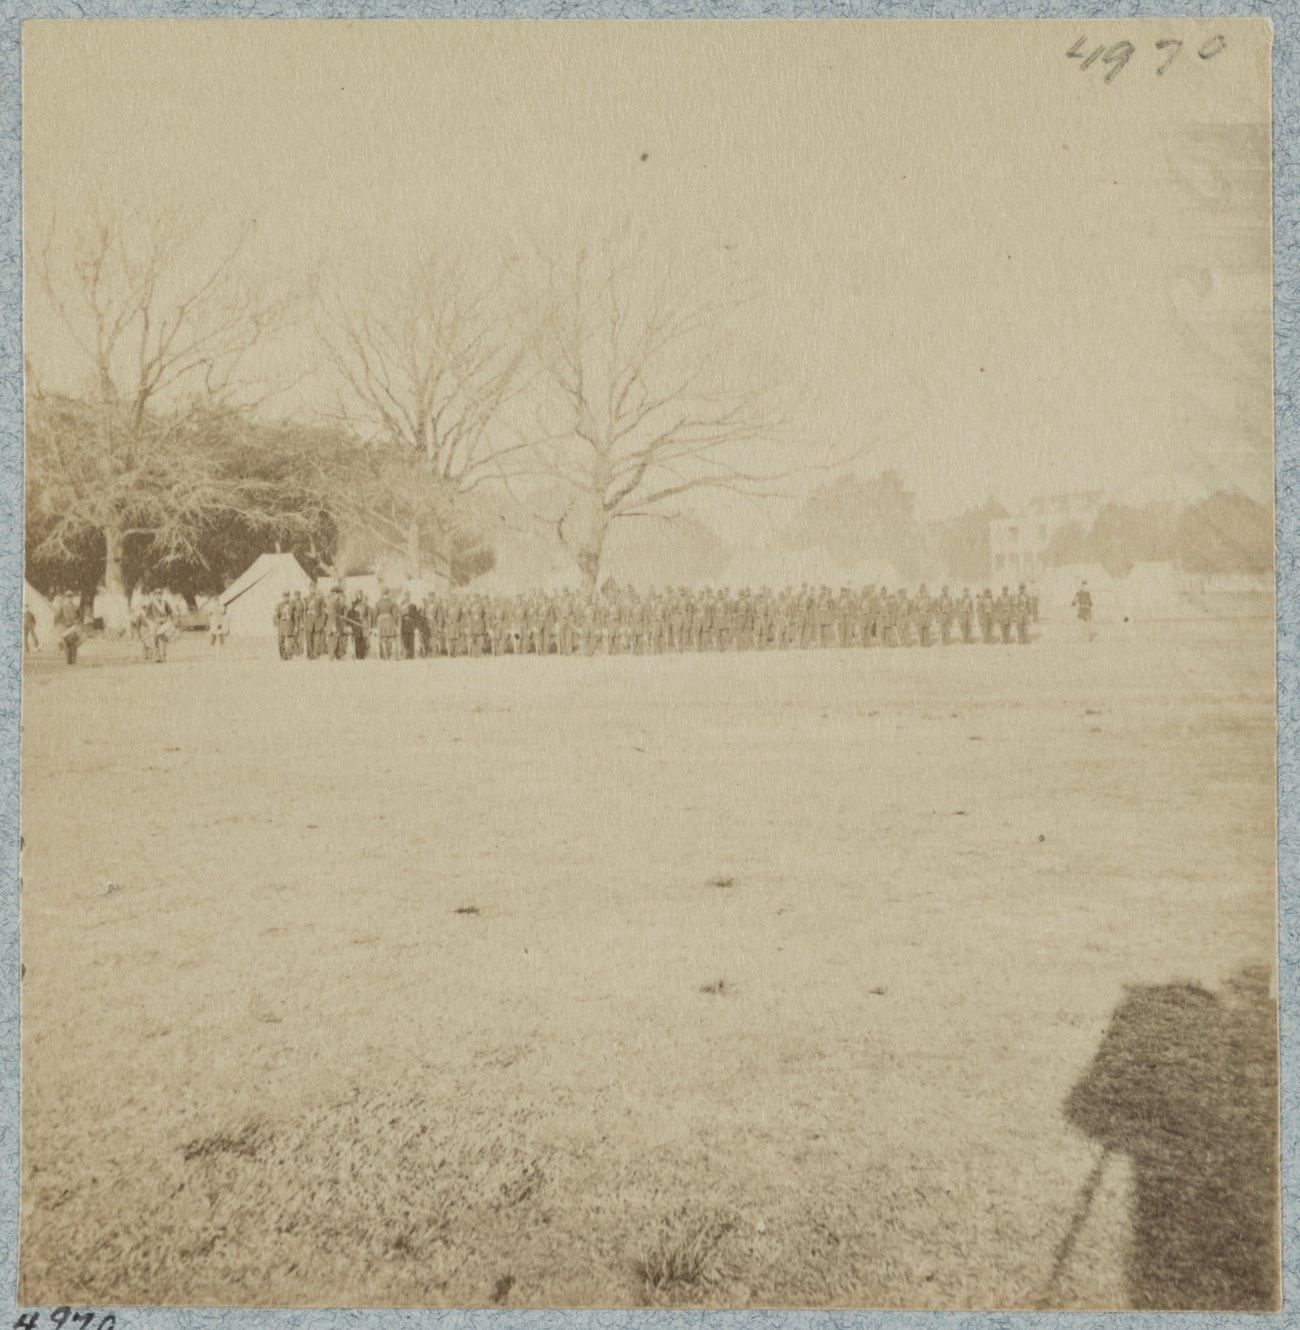 A military regiment lined up marching.